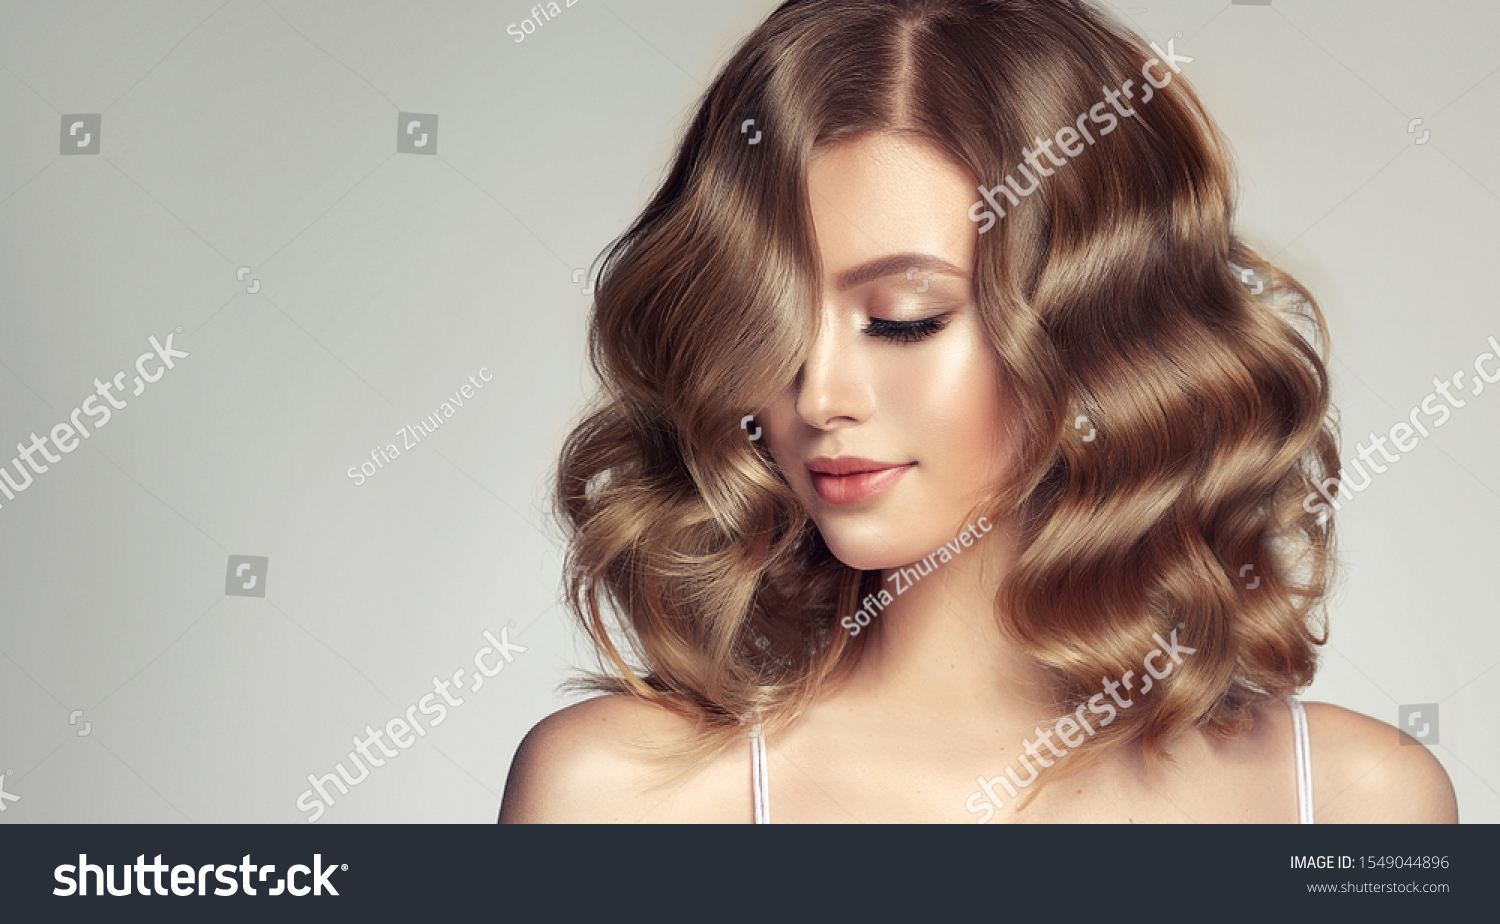 Woman with curly beautiful hair  on gray background. Girl with beauty a pleasant smile. Short wavy  hairstyle #1549044896